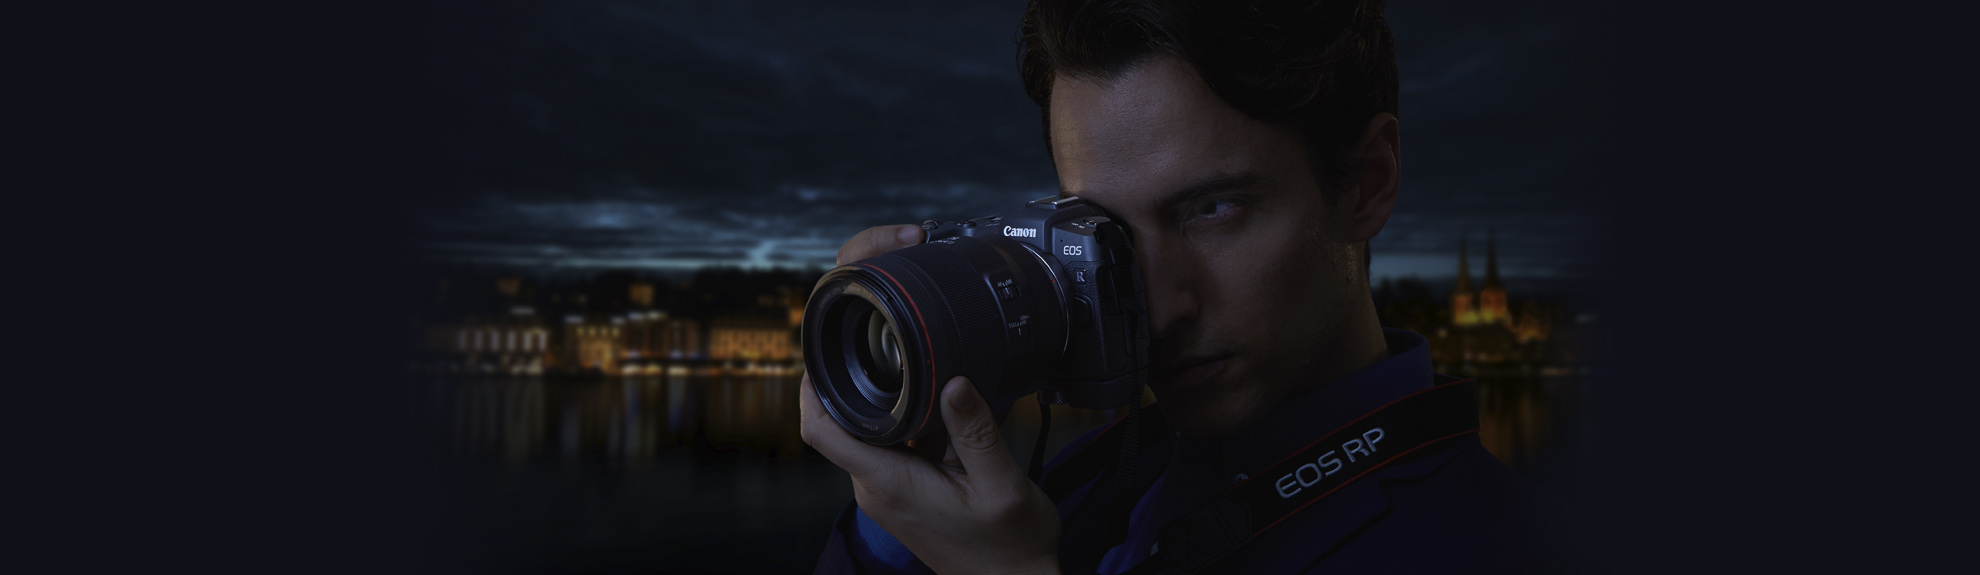 Photographer looking through the Canon RP's viewfinder with a dark background